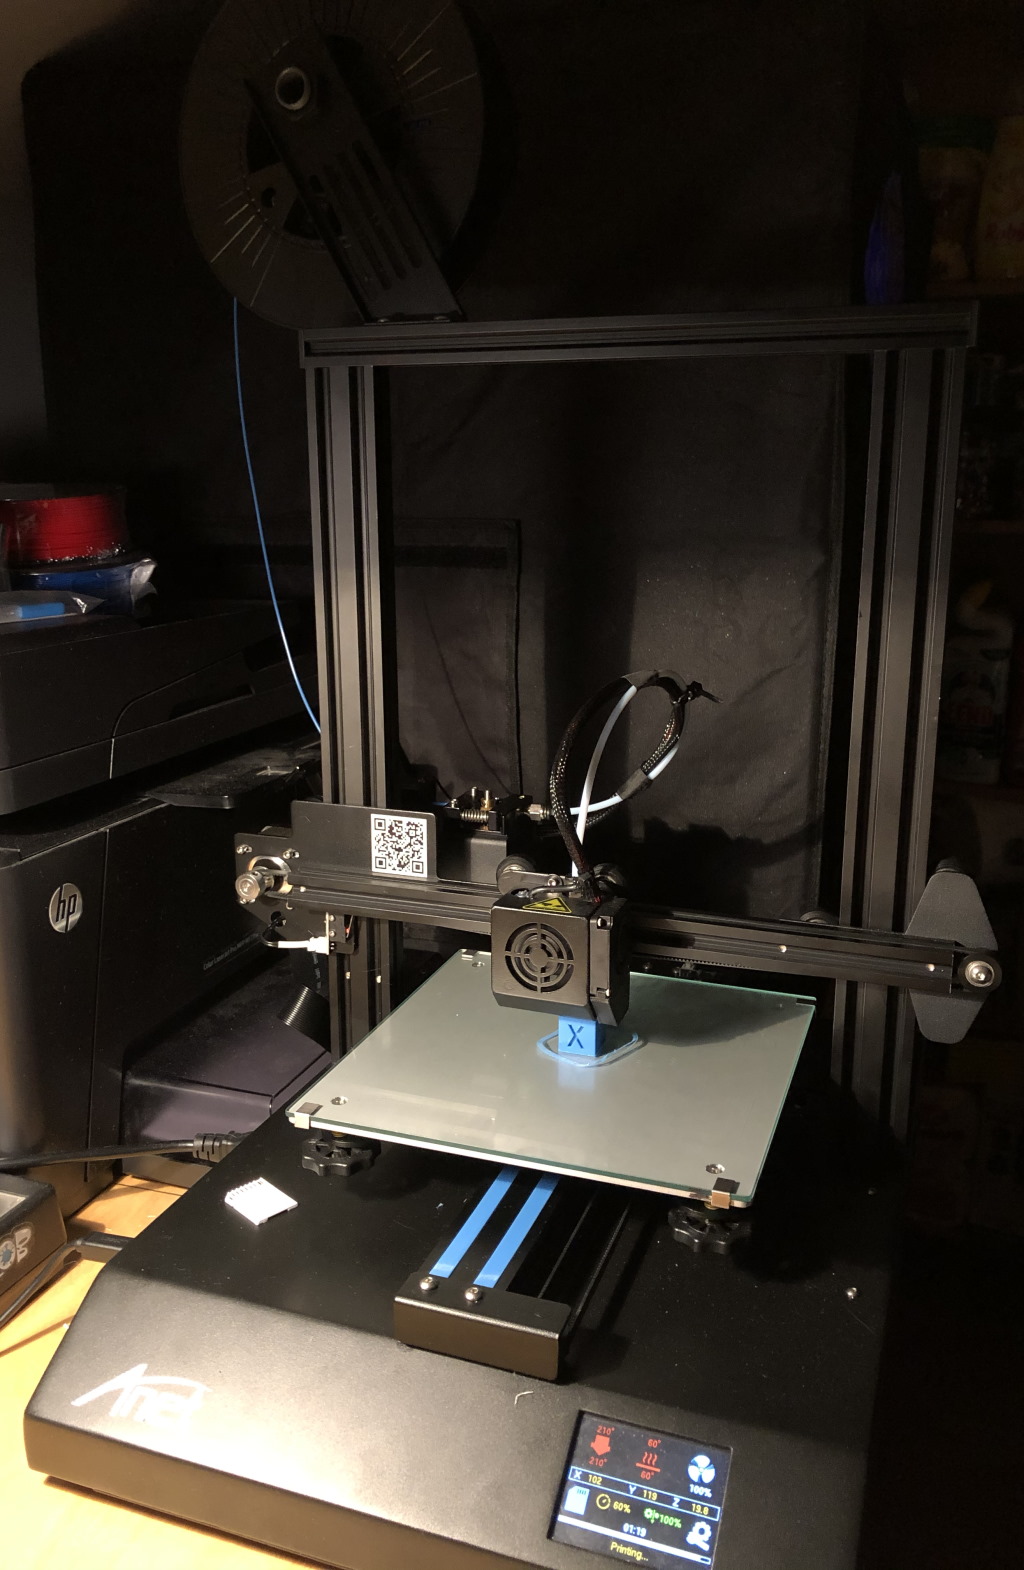 Anet ET4 Pro test prints - full in action